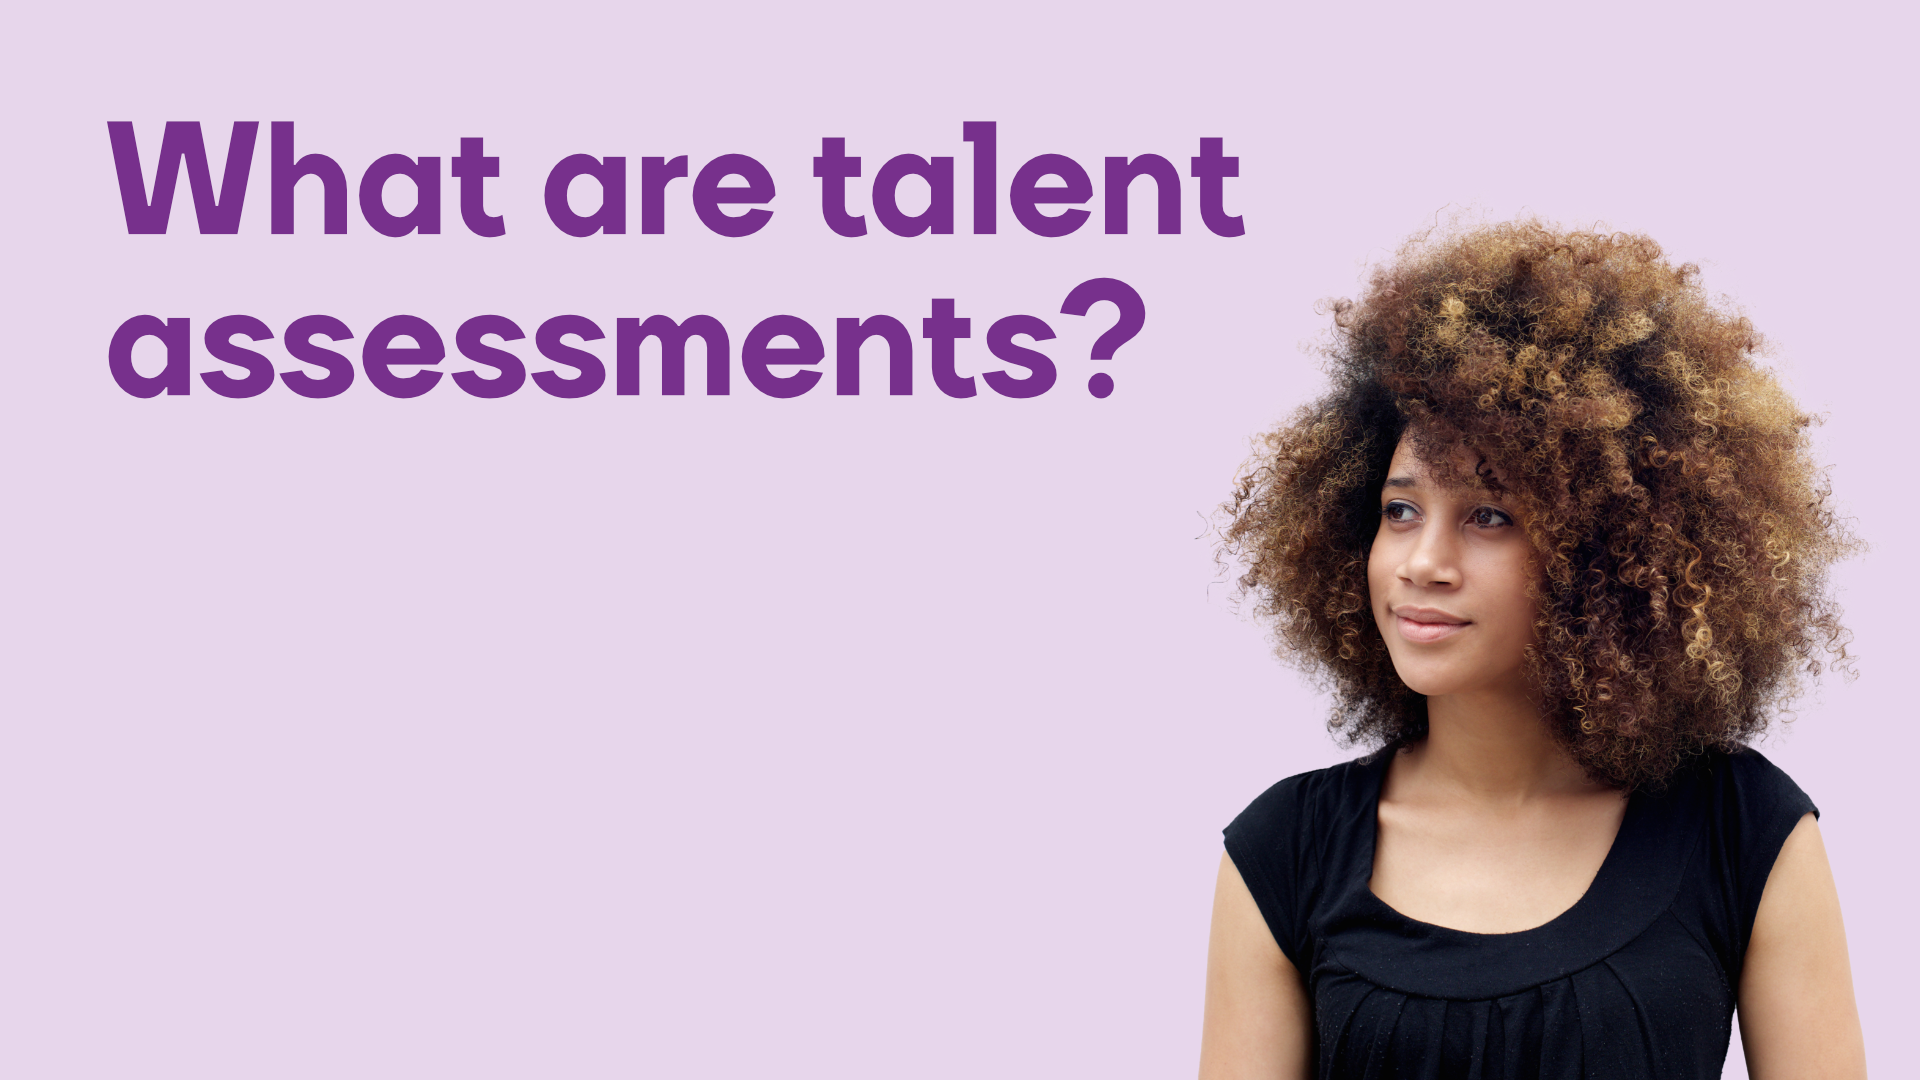 What are talent assessments?